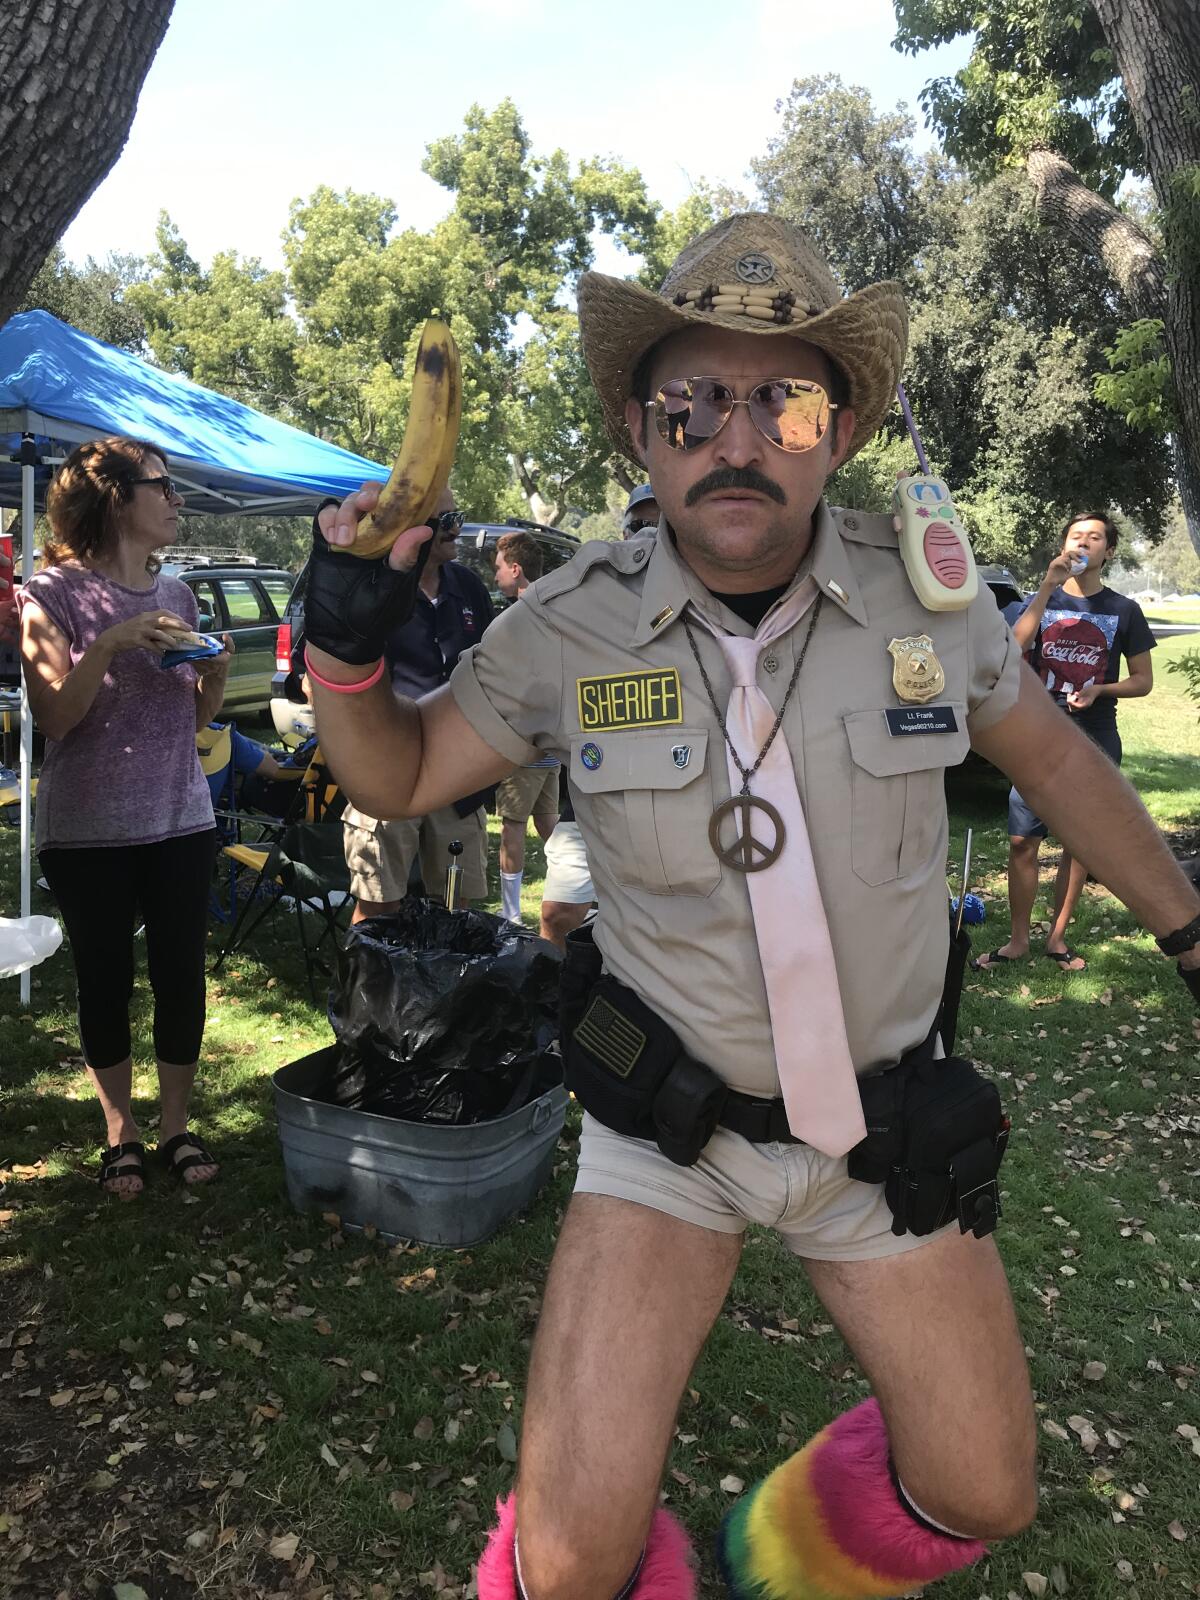 The faux law, a tailgate party crasher dressed for "Reno 911!"